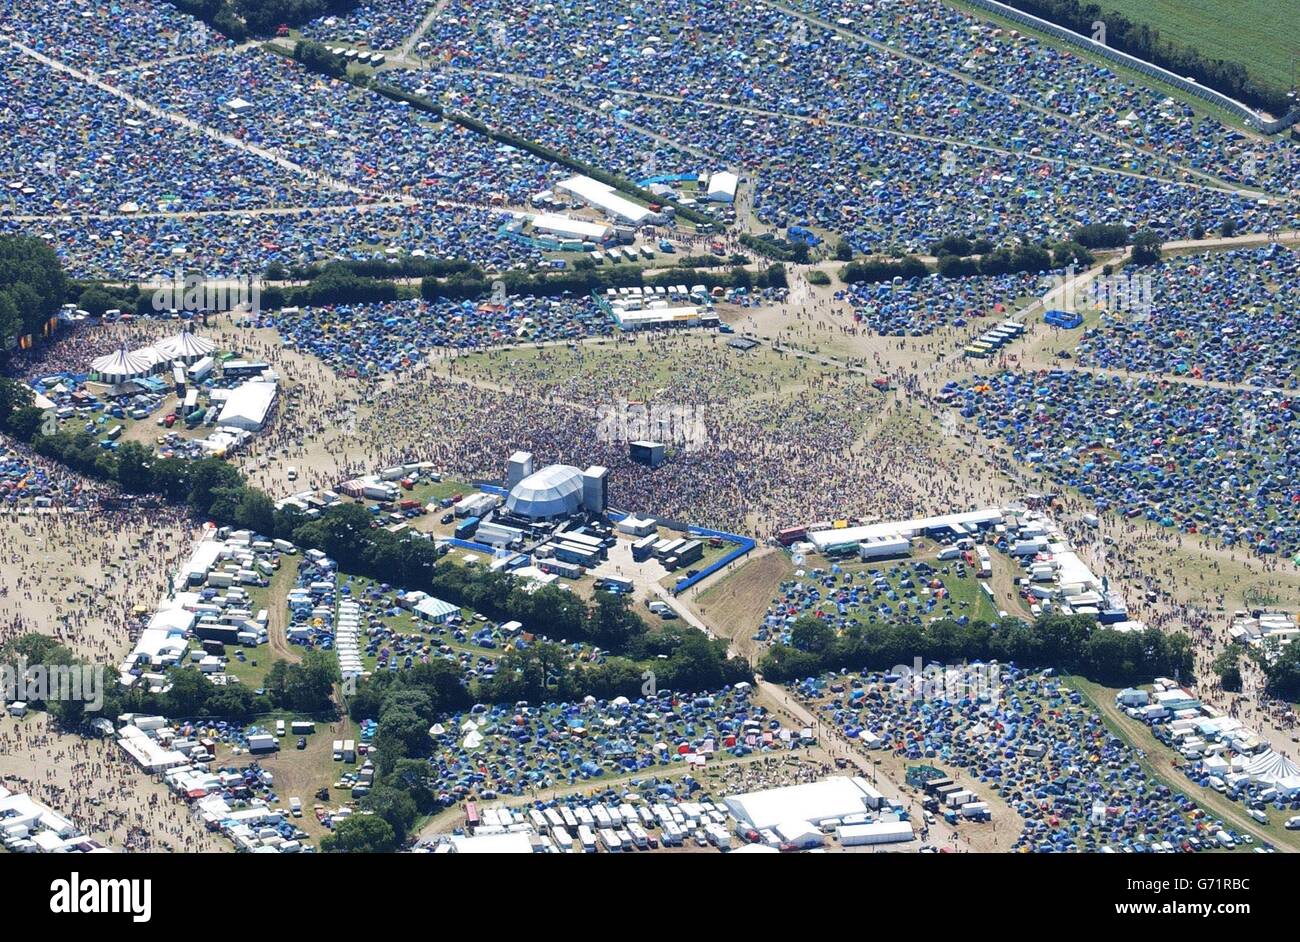 Aeriel view of thousands of music lovers, at this year's Glastonbury Festival on the Worthy Farm site at Pilton. Stock Photo